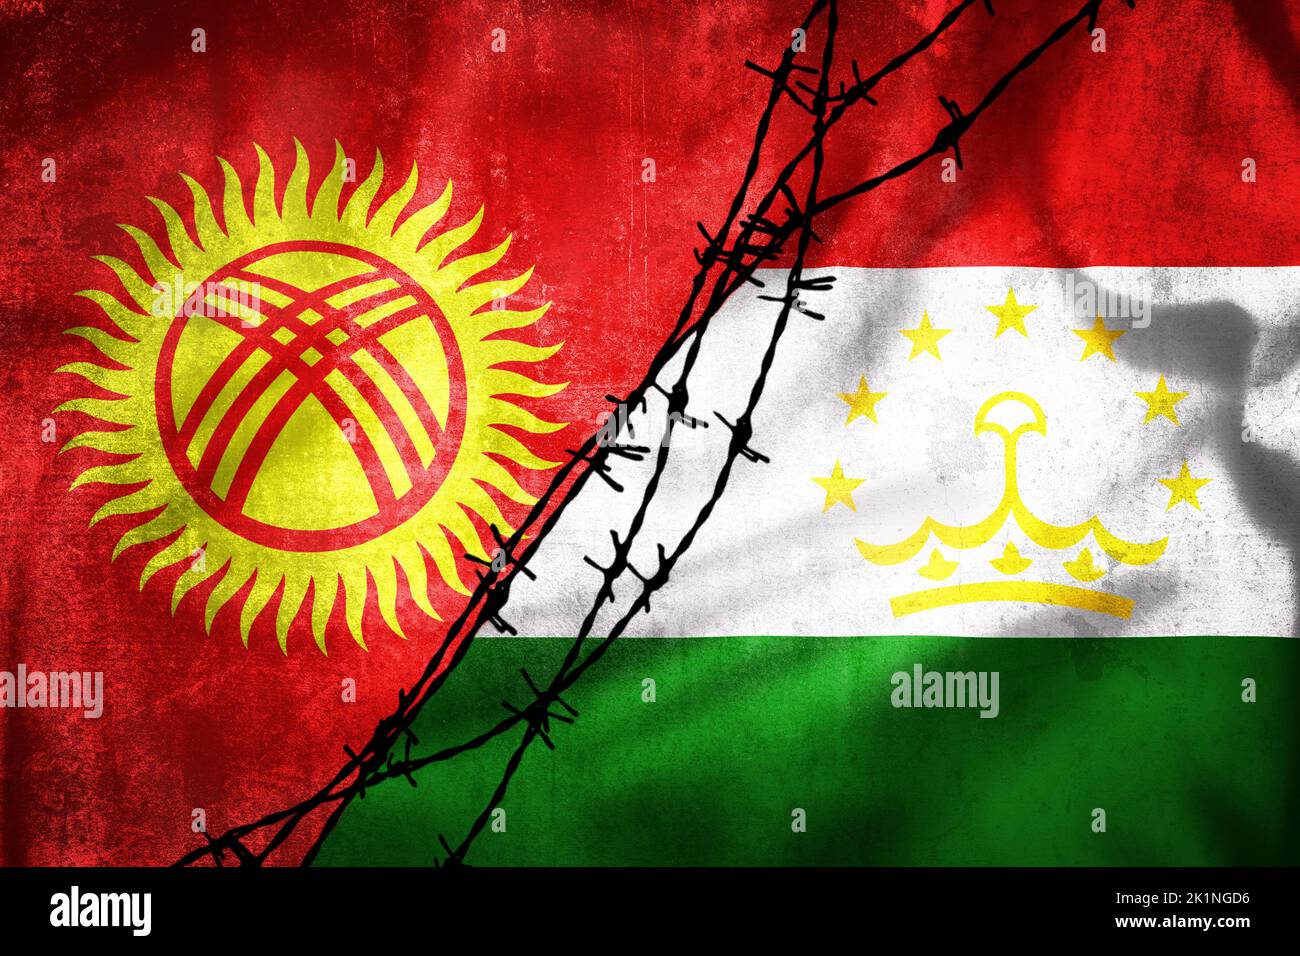 Grunge flags of Kyrgyzstan and Tajikistan divided by barb wire illustration, concept of tense relations between two countries Stock Photo